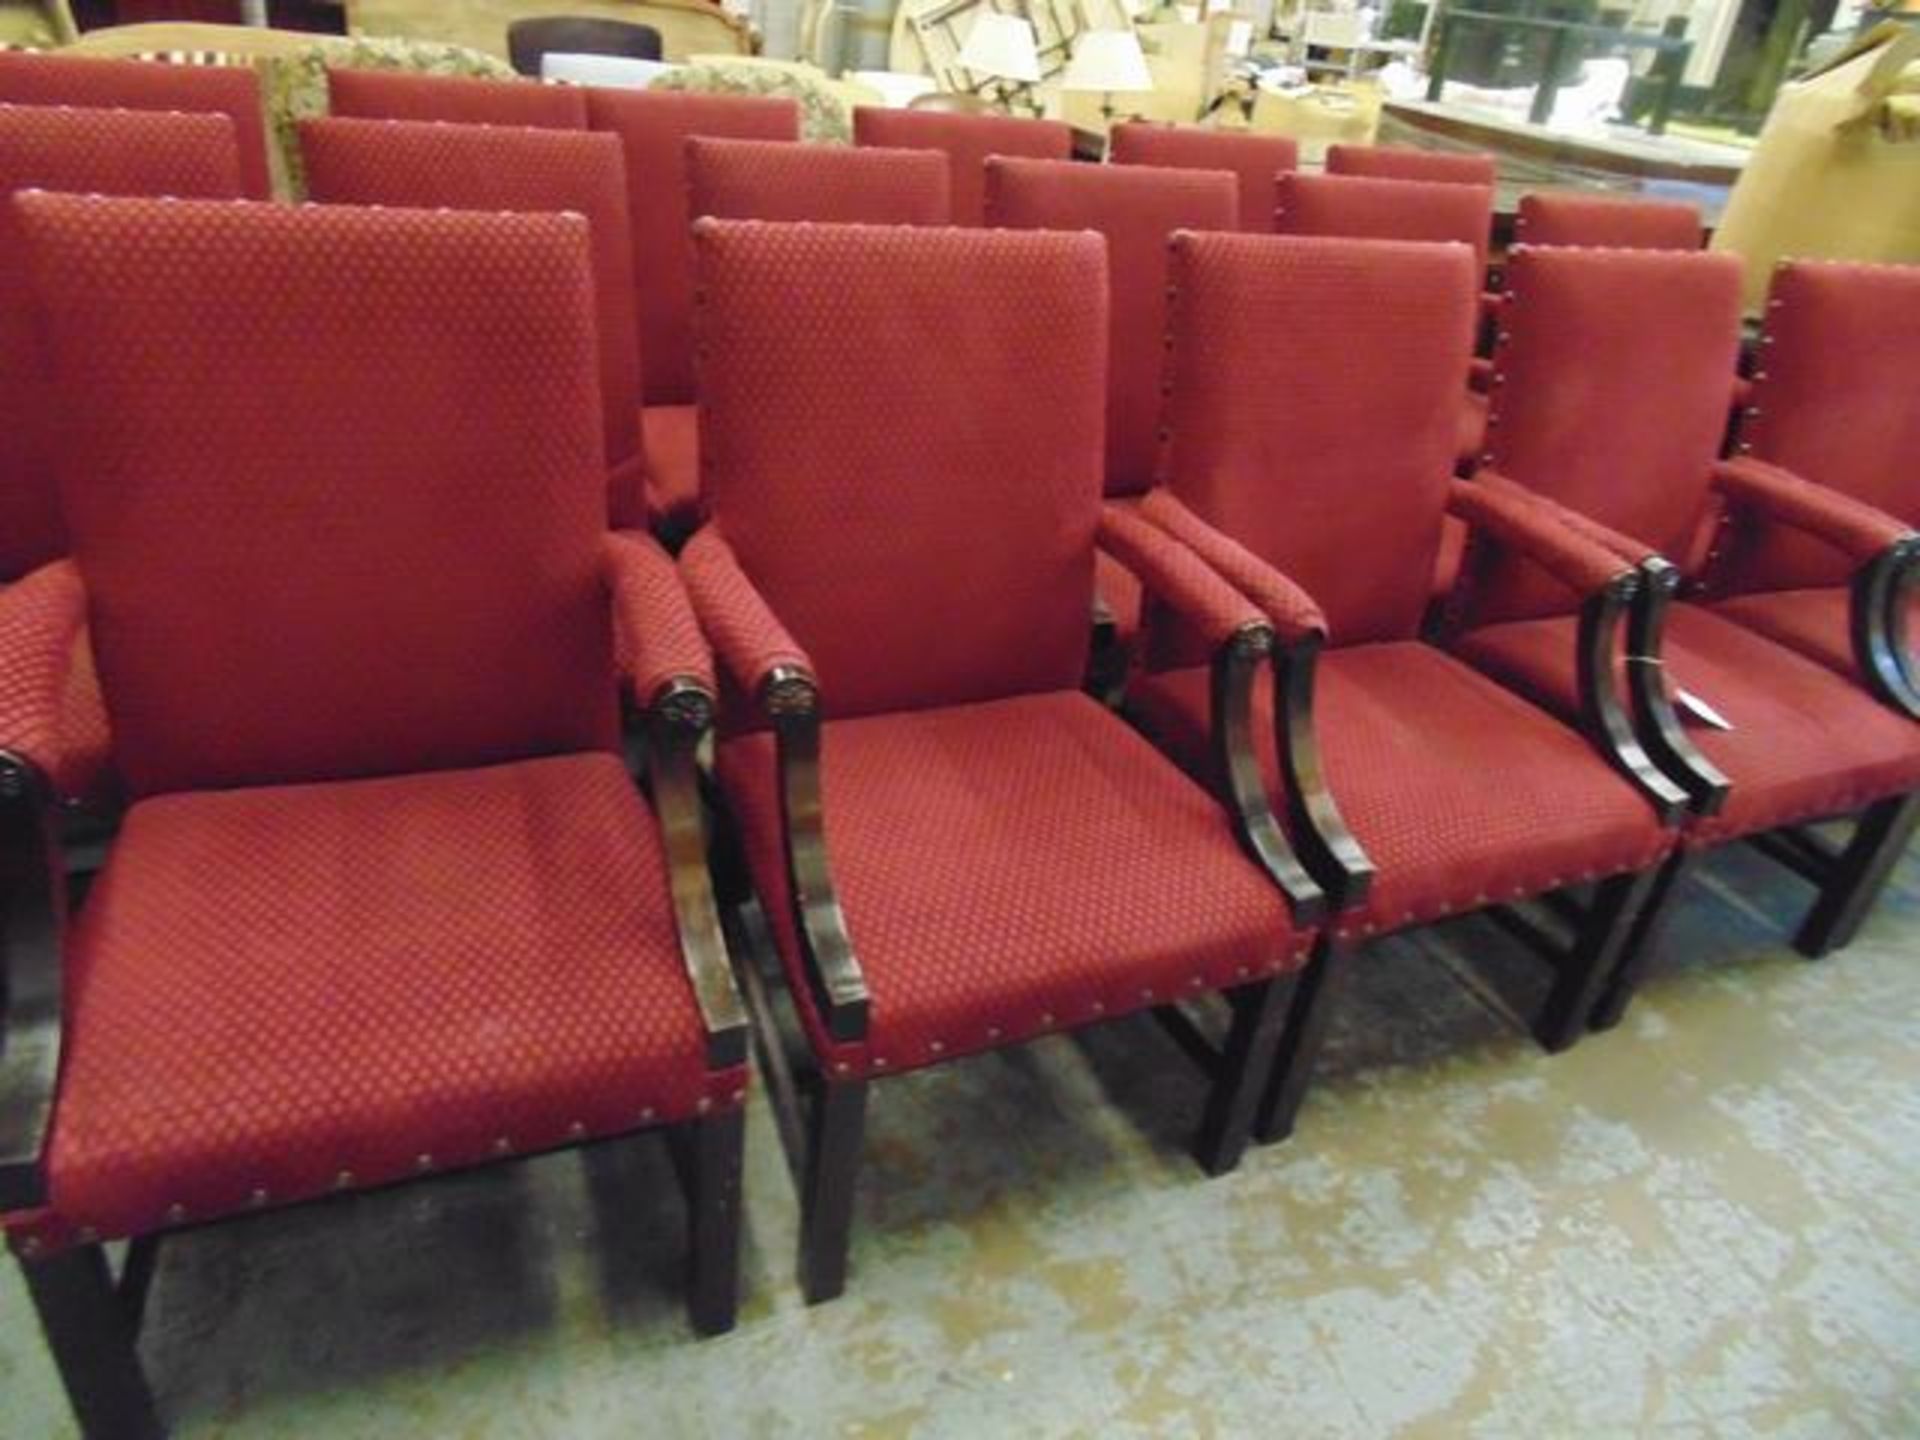 A set of four Windsor upholstered carver chairs upholstered in red fabric with stud button finish